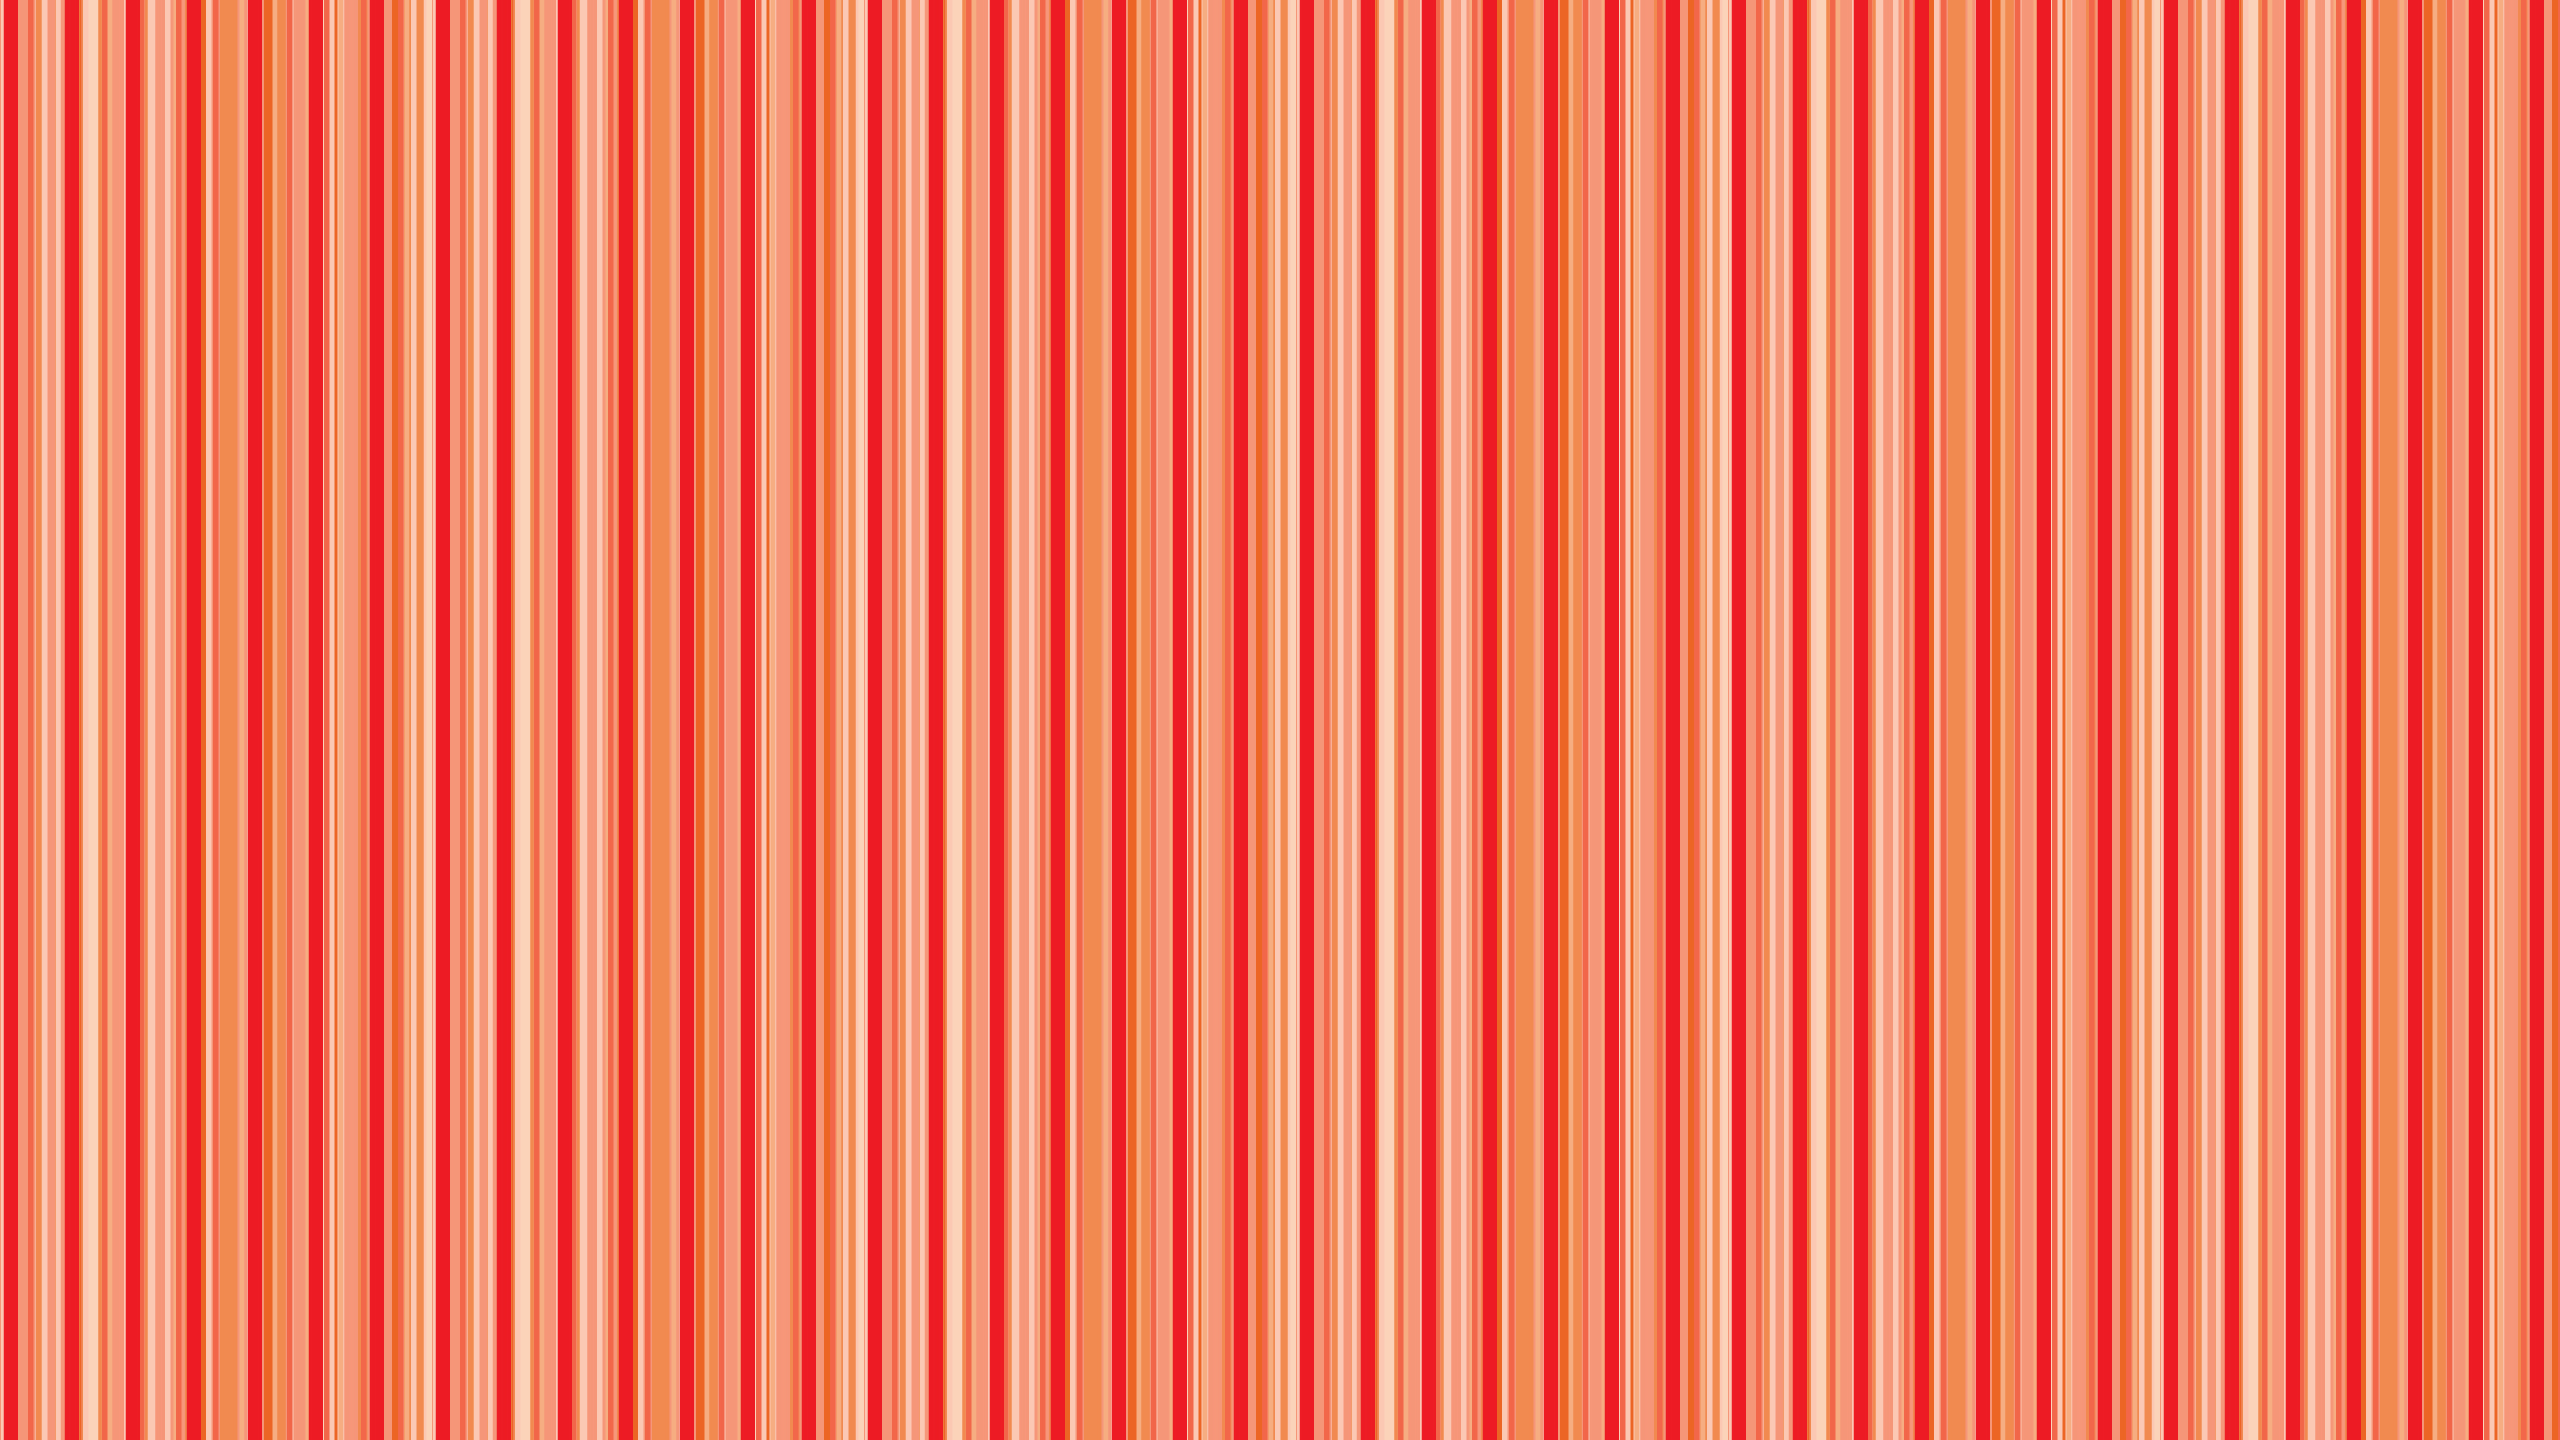 This Red Stripe Desktop Wallpaper Is Easy Just Save The